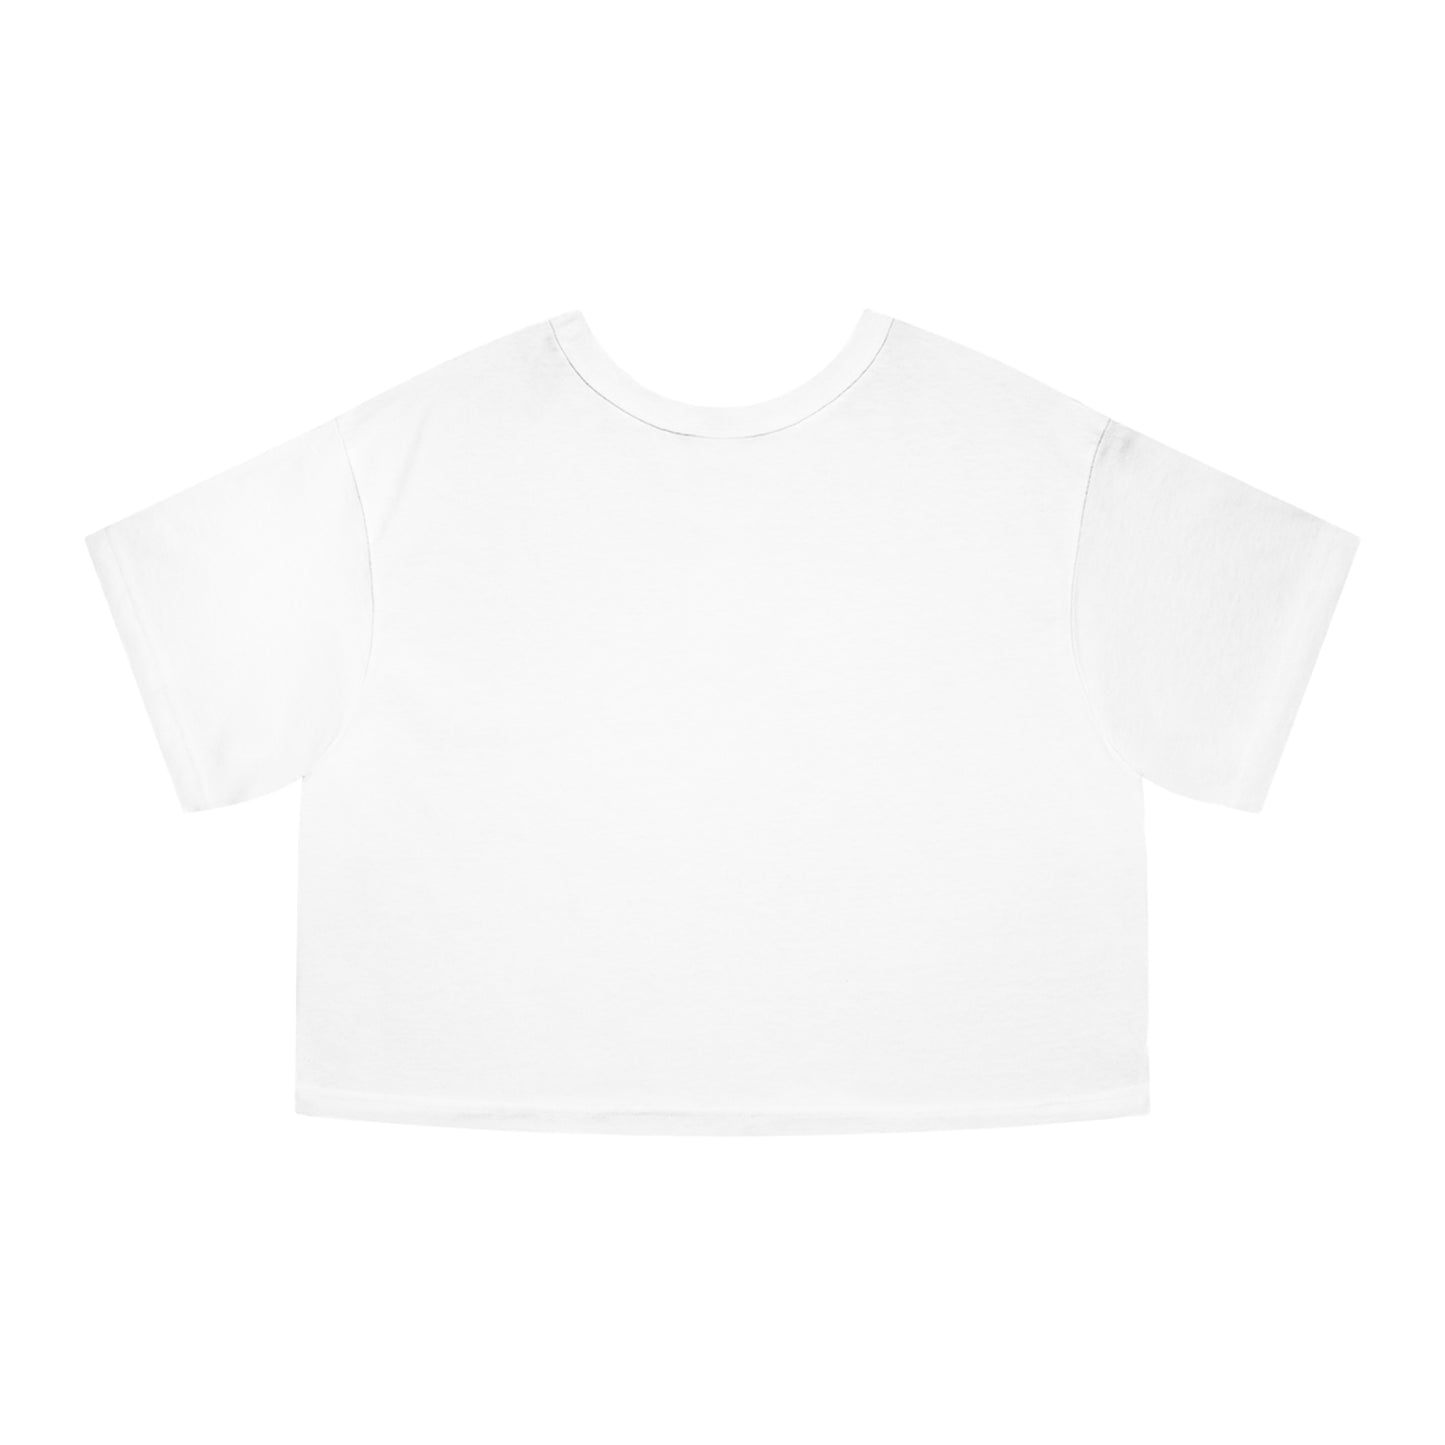 "Become Ungovernable" - Champion crop top